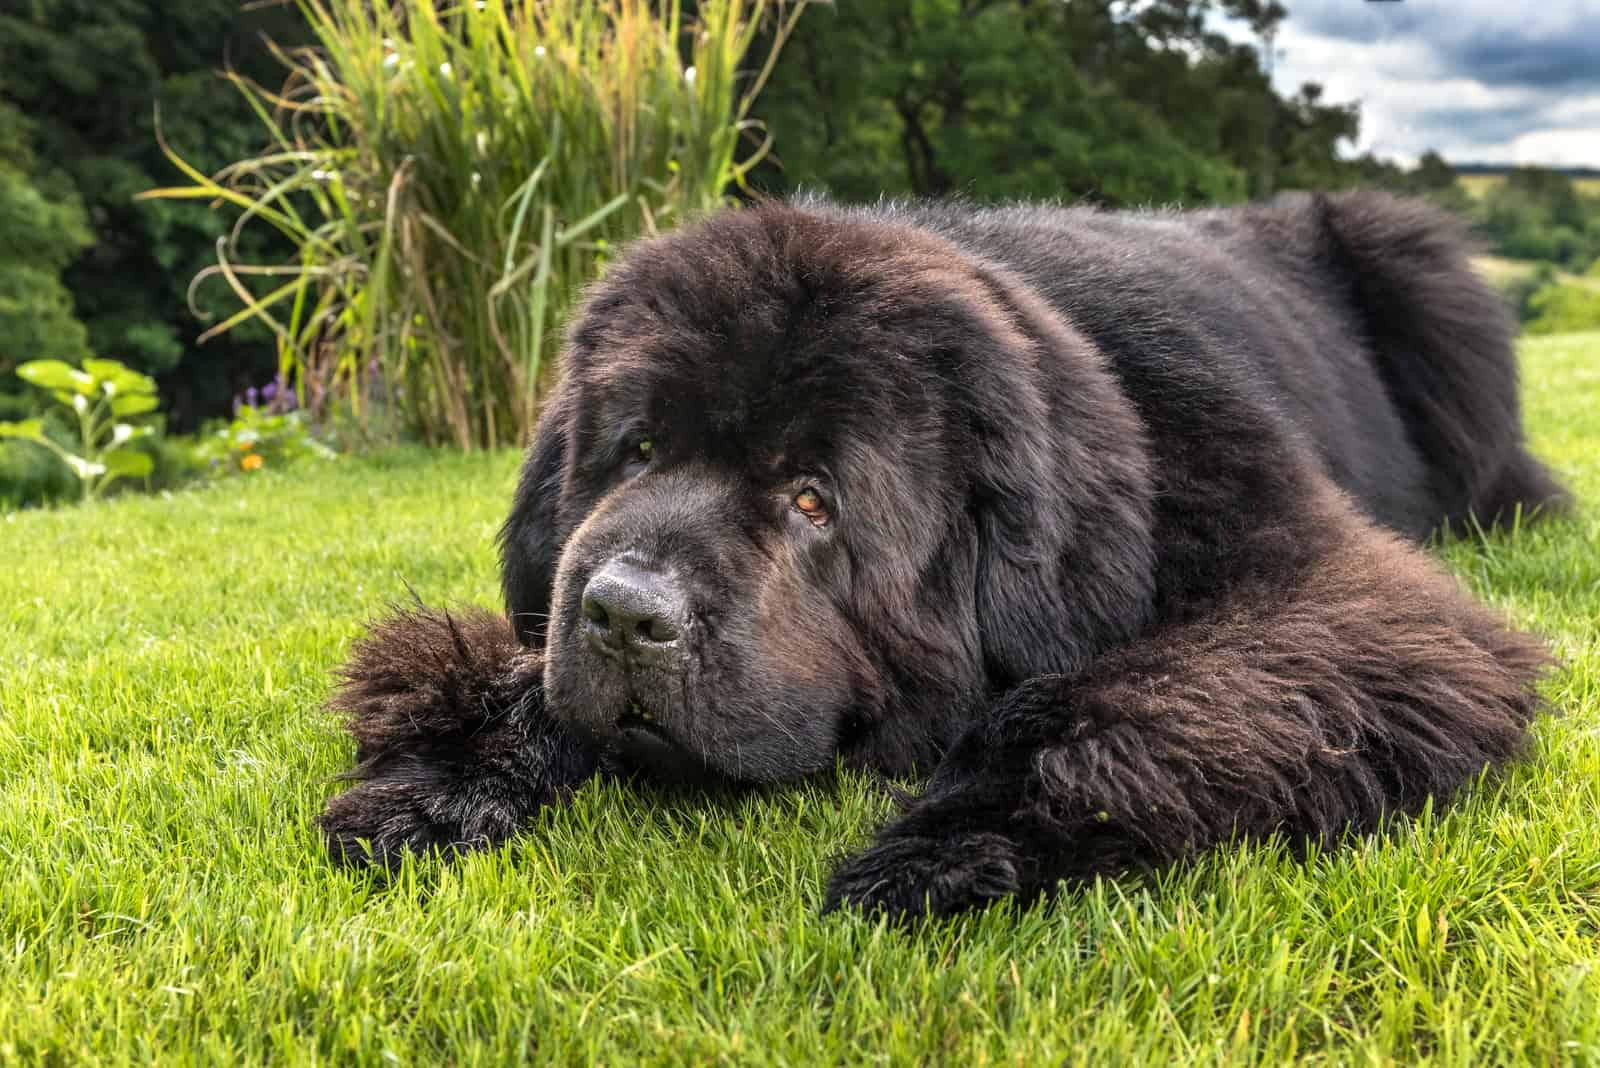 Newfoundland lies down and rests